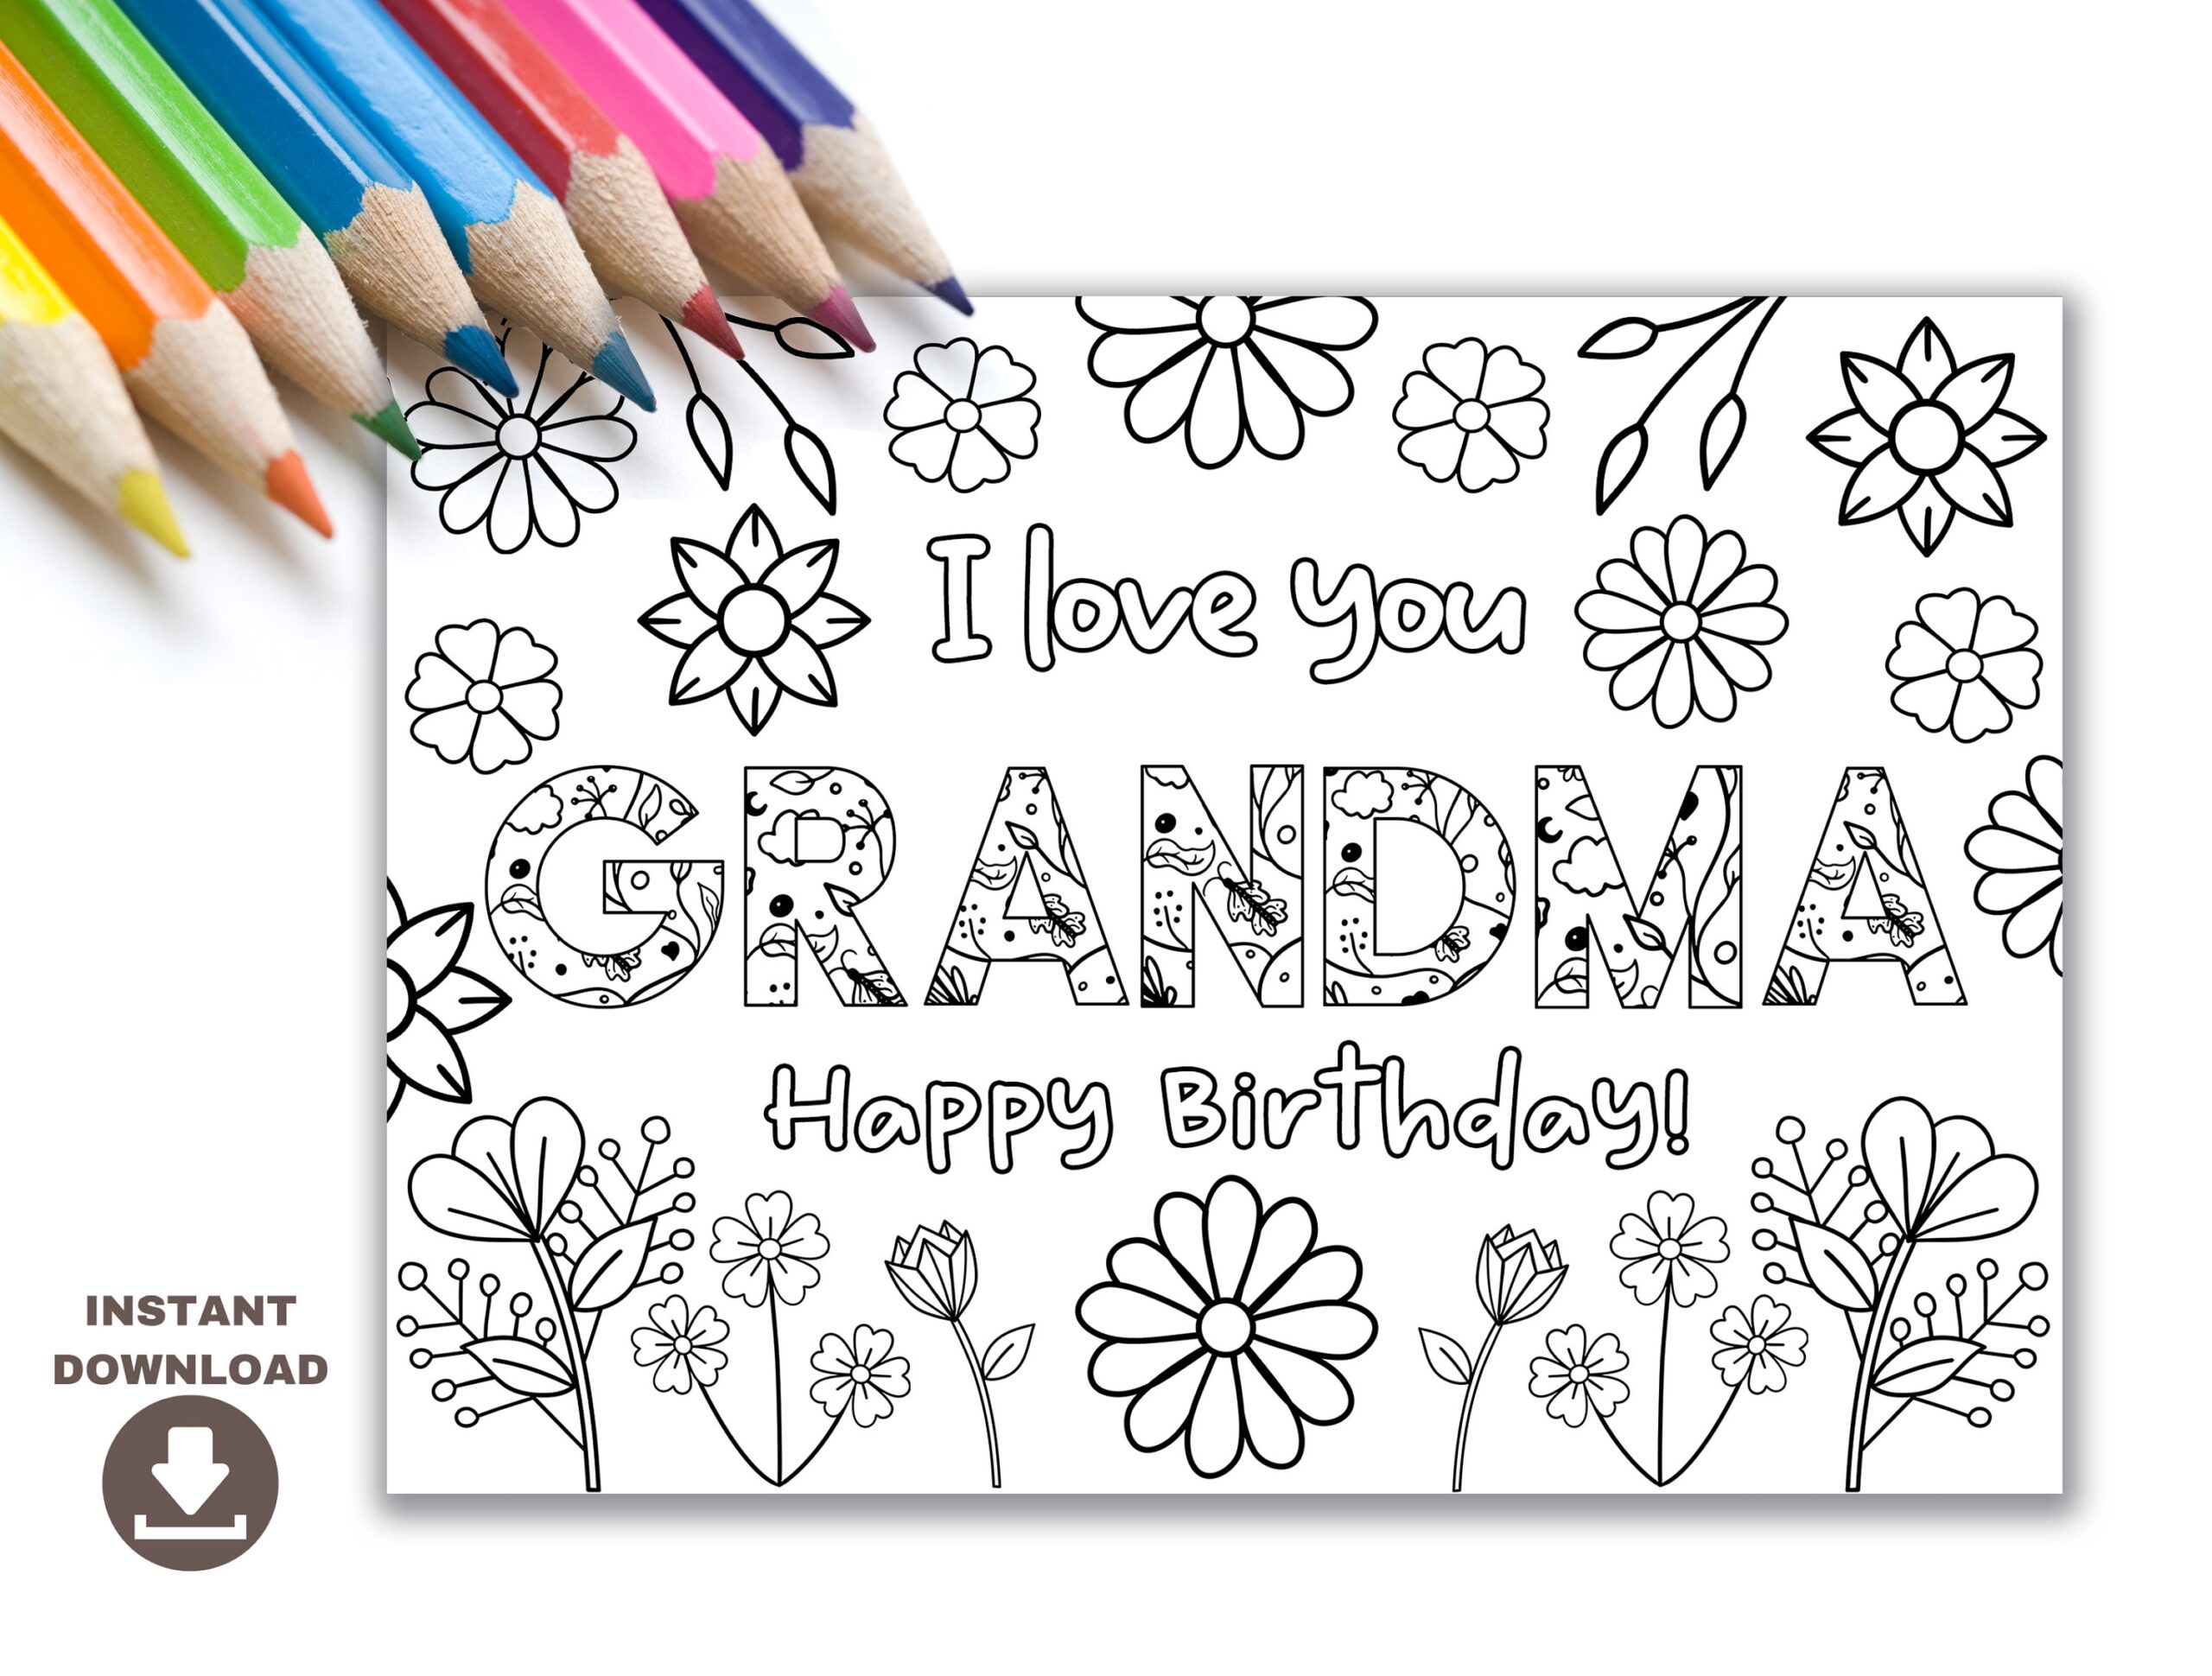 Printable Coloring Birthday Card For Grandma Grandmother Birthday Card DIY Gift Kids Craft For Grandma Birthday Instant Download Card Etsy